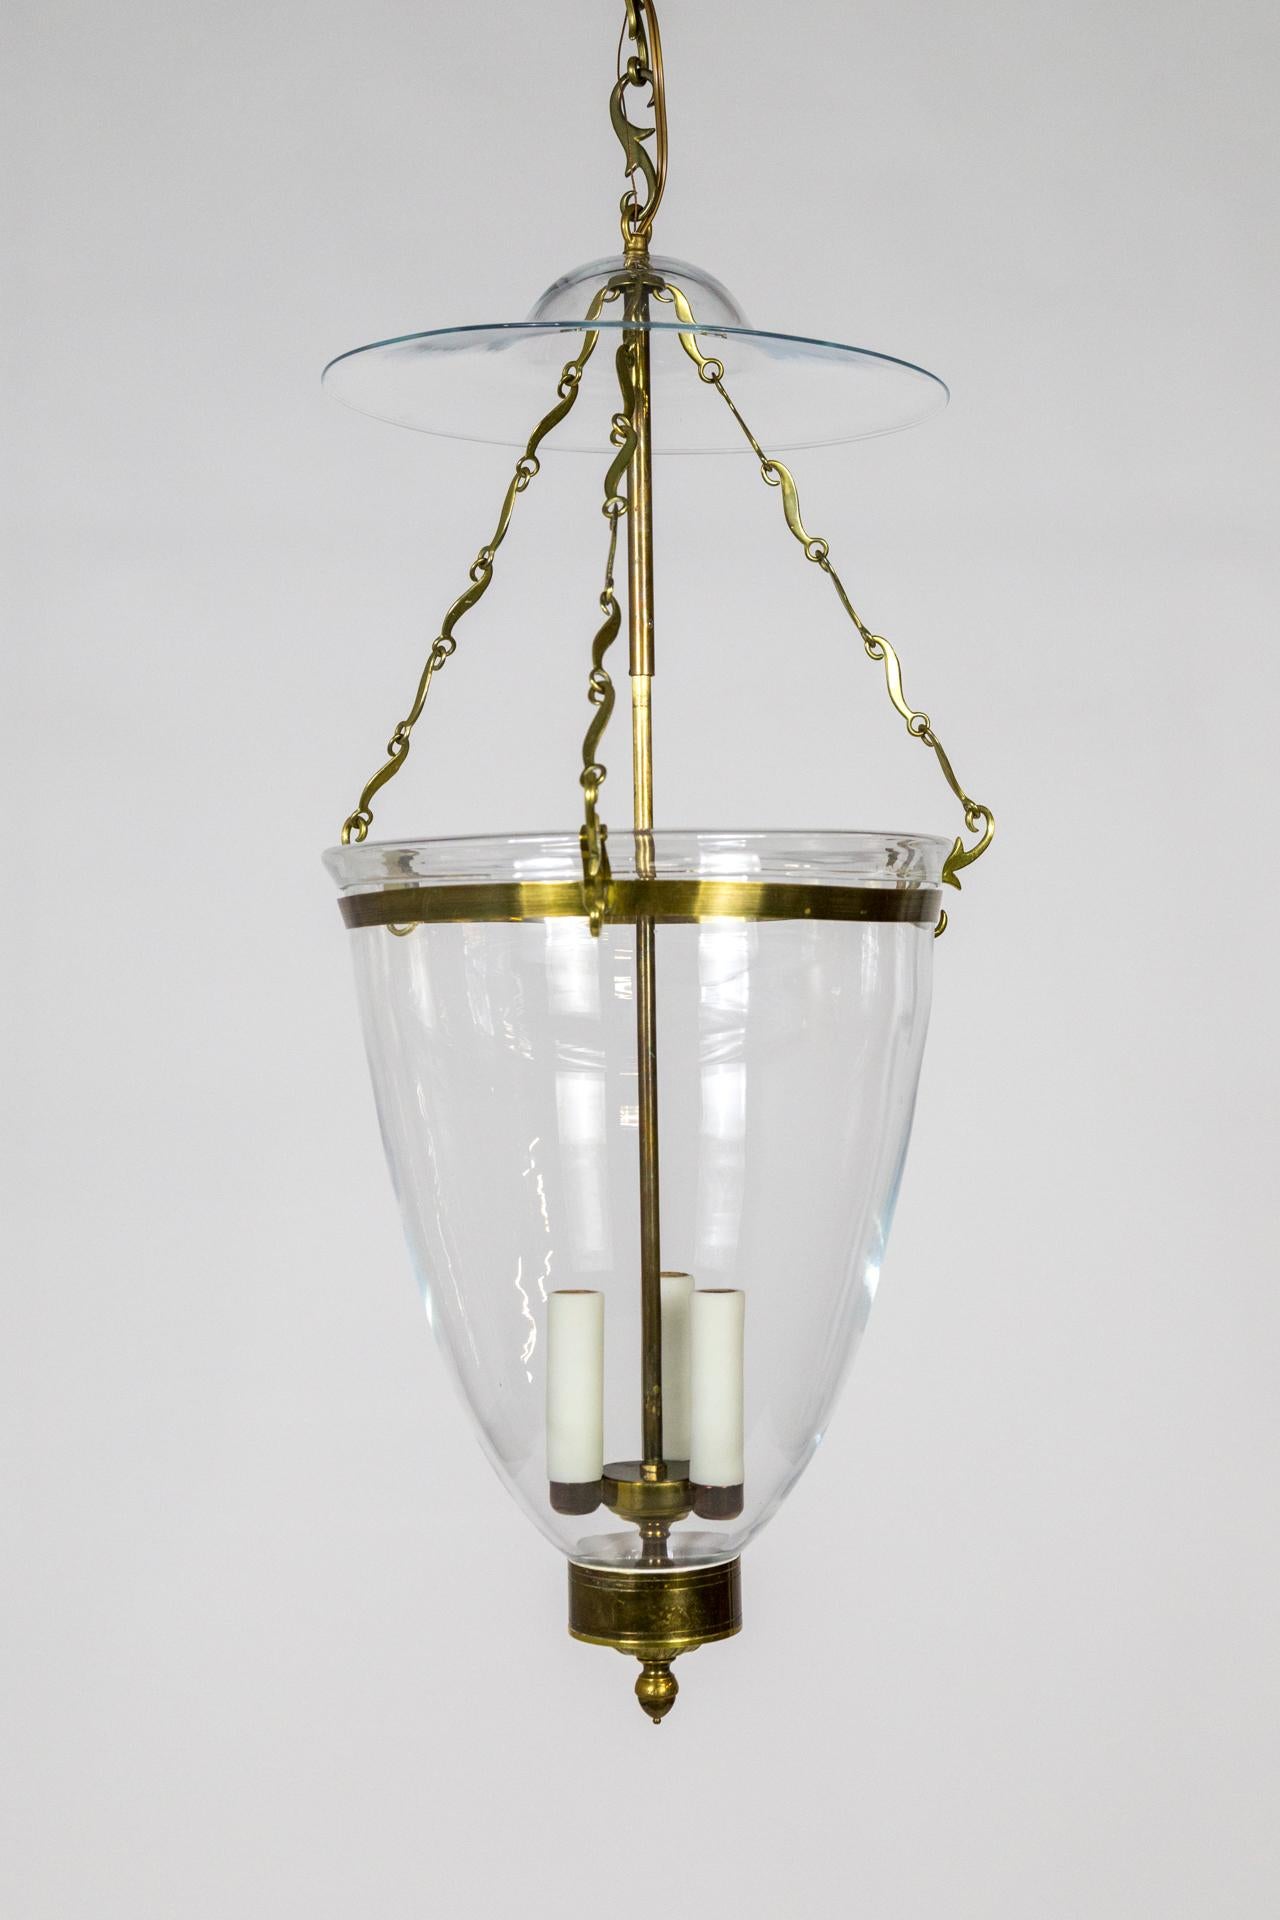 Belle Époque style, oversized glass and brass bell jar lantern, pendant. Acanthus leaf and acorn detailing with custom delicately swirled chain links. American made by Ball and Ball Co of Pennsylvania. Newly wired, 3 e12 sockets. UL listing